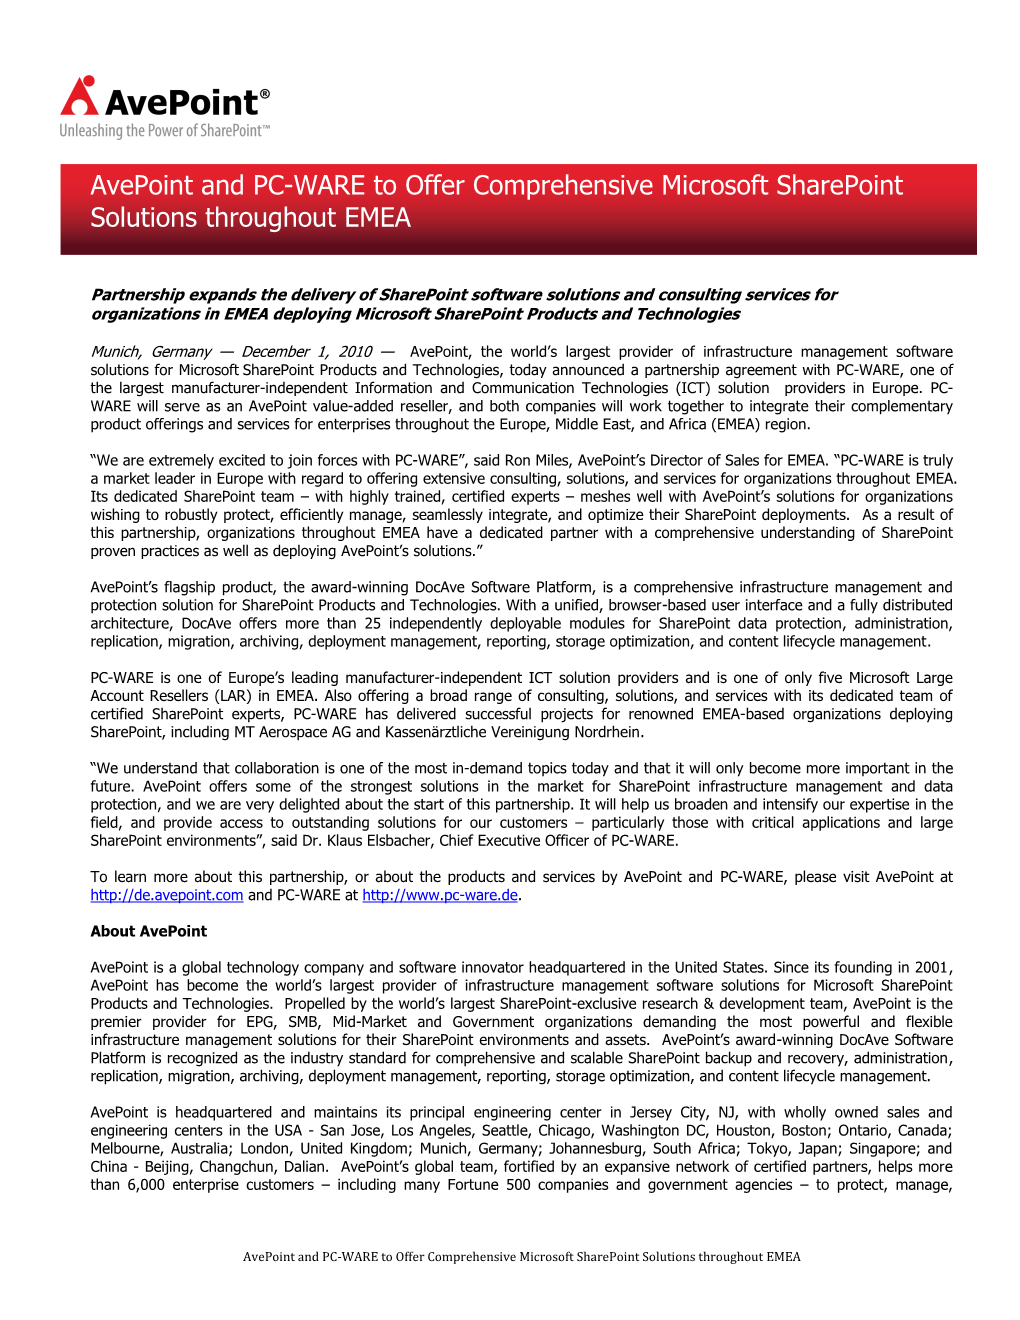 Avepoint and PC-WARE to Offer Comprehensive Microsoft Sharepoint Solutions Throughout EMEA